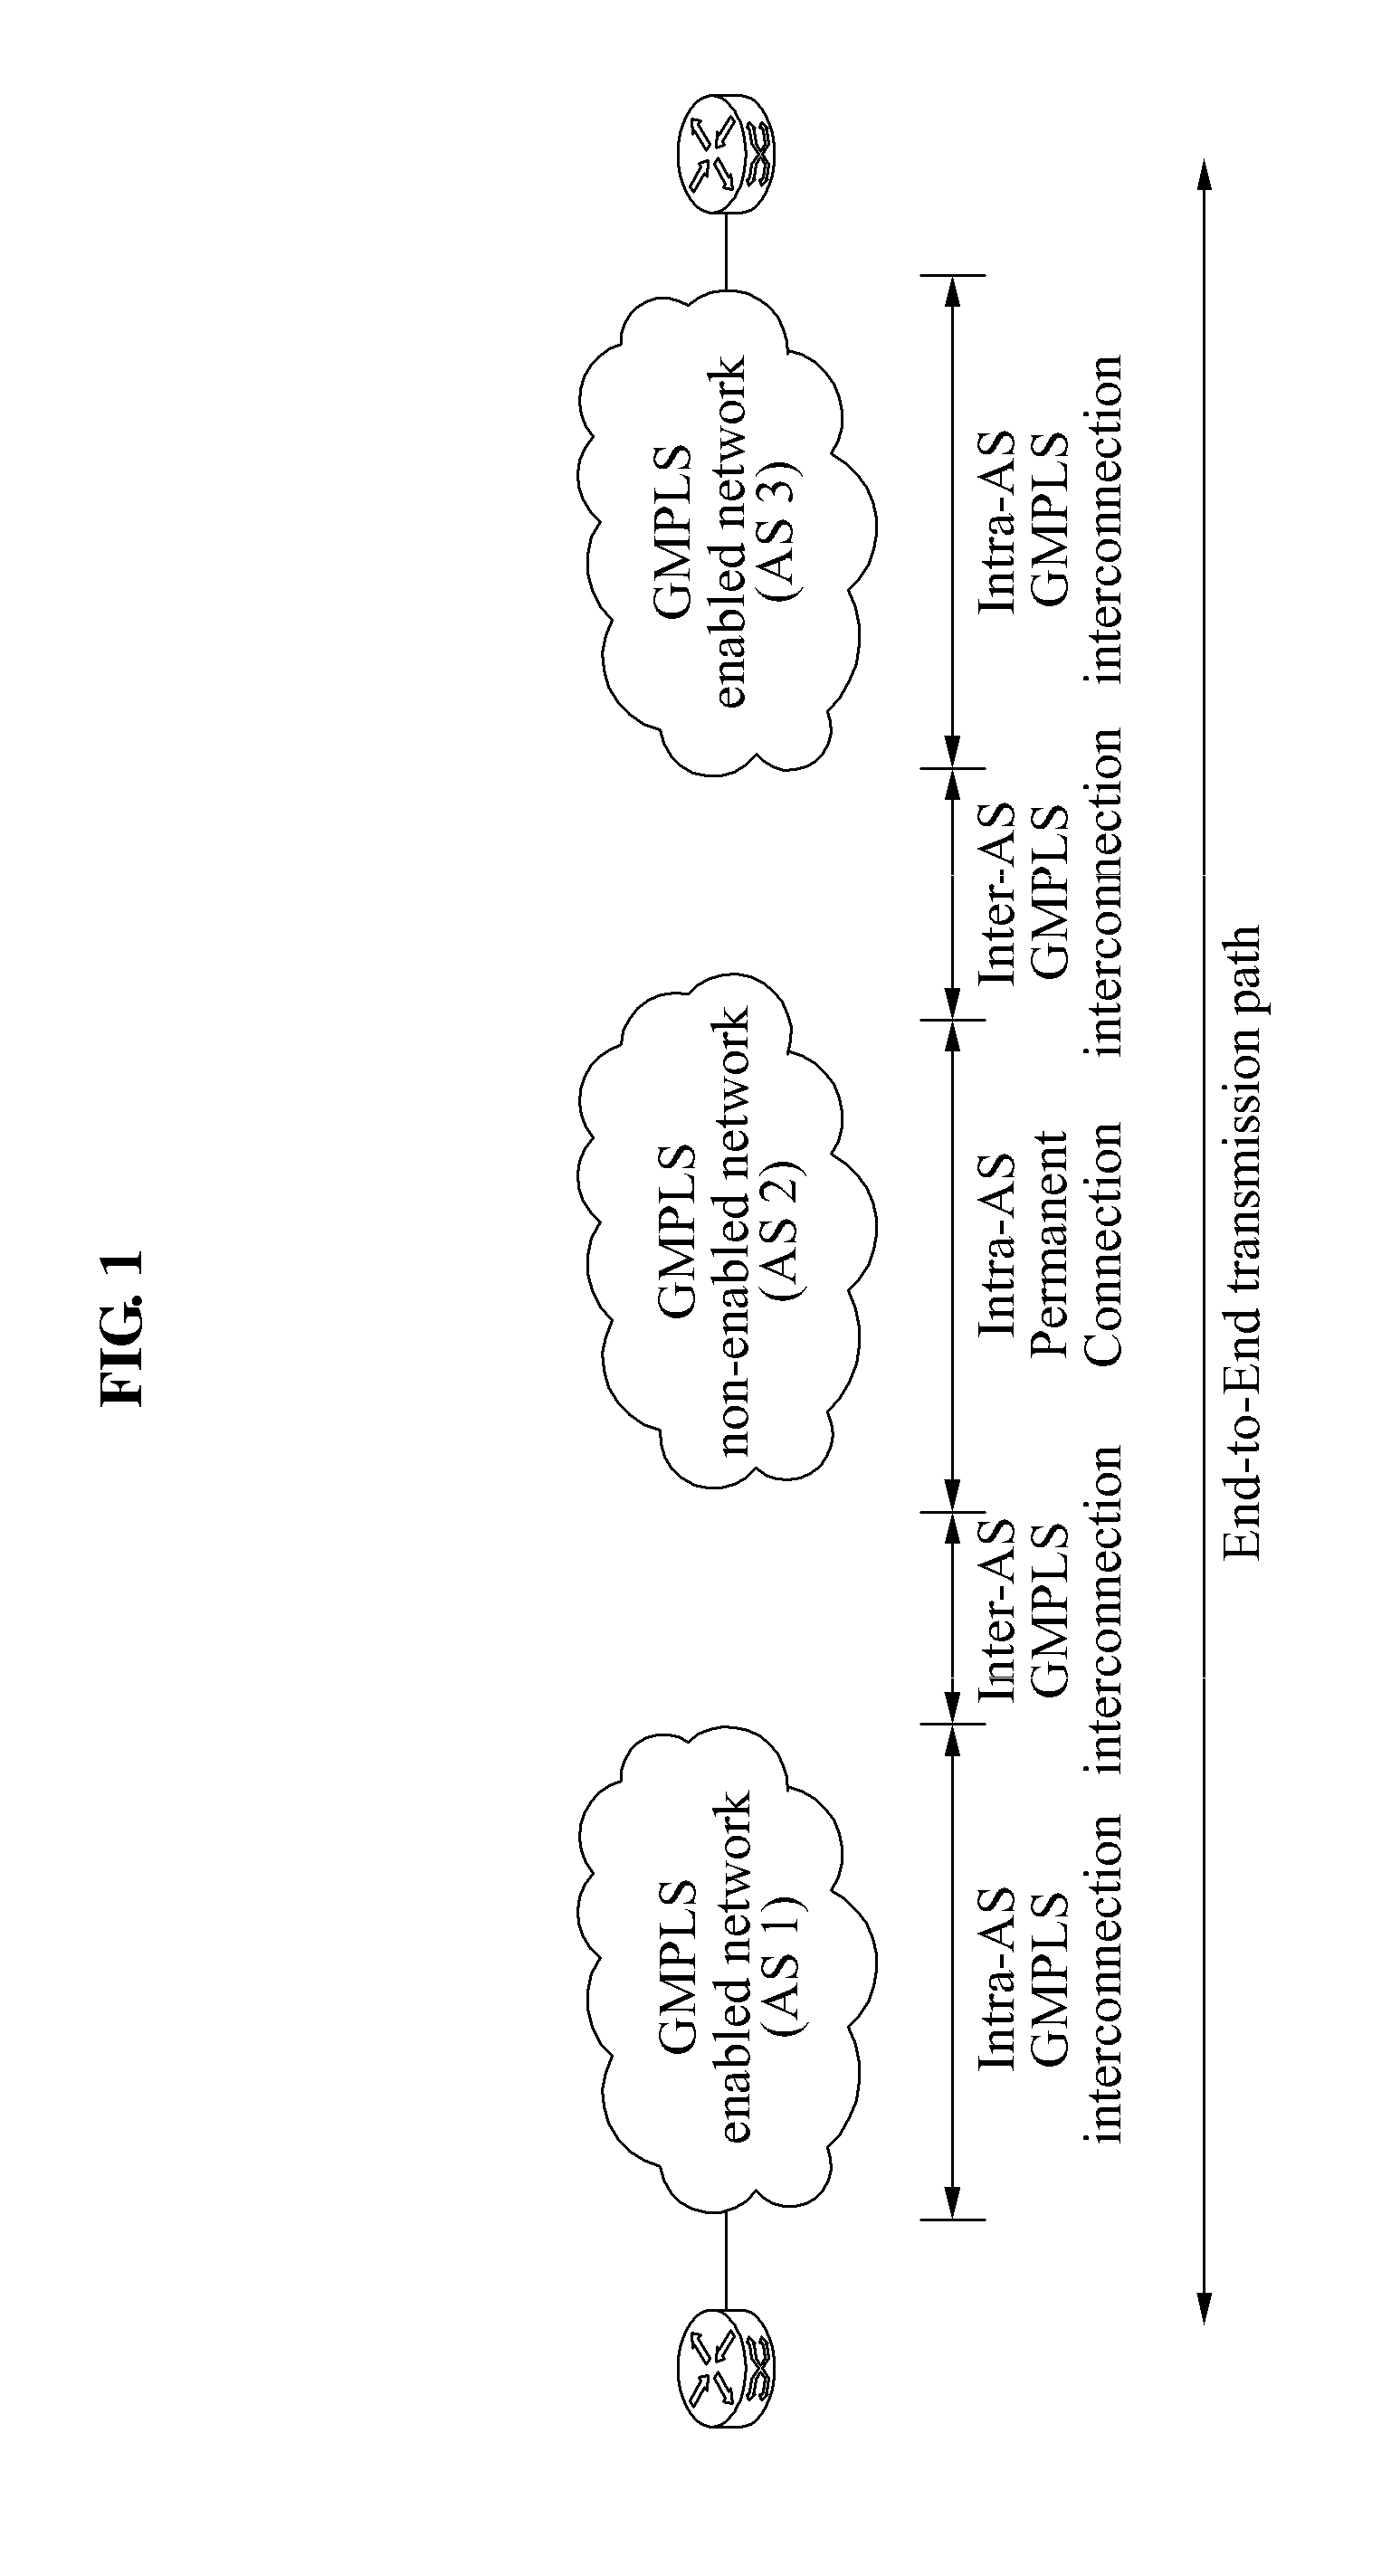 Gmpls non-enabled network gateway and operating method for routing between gmpls enabled network and gmpls non-enabled network